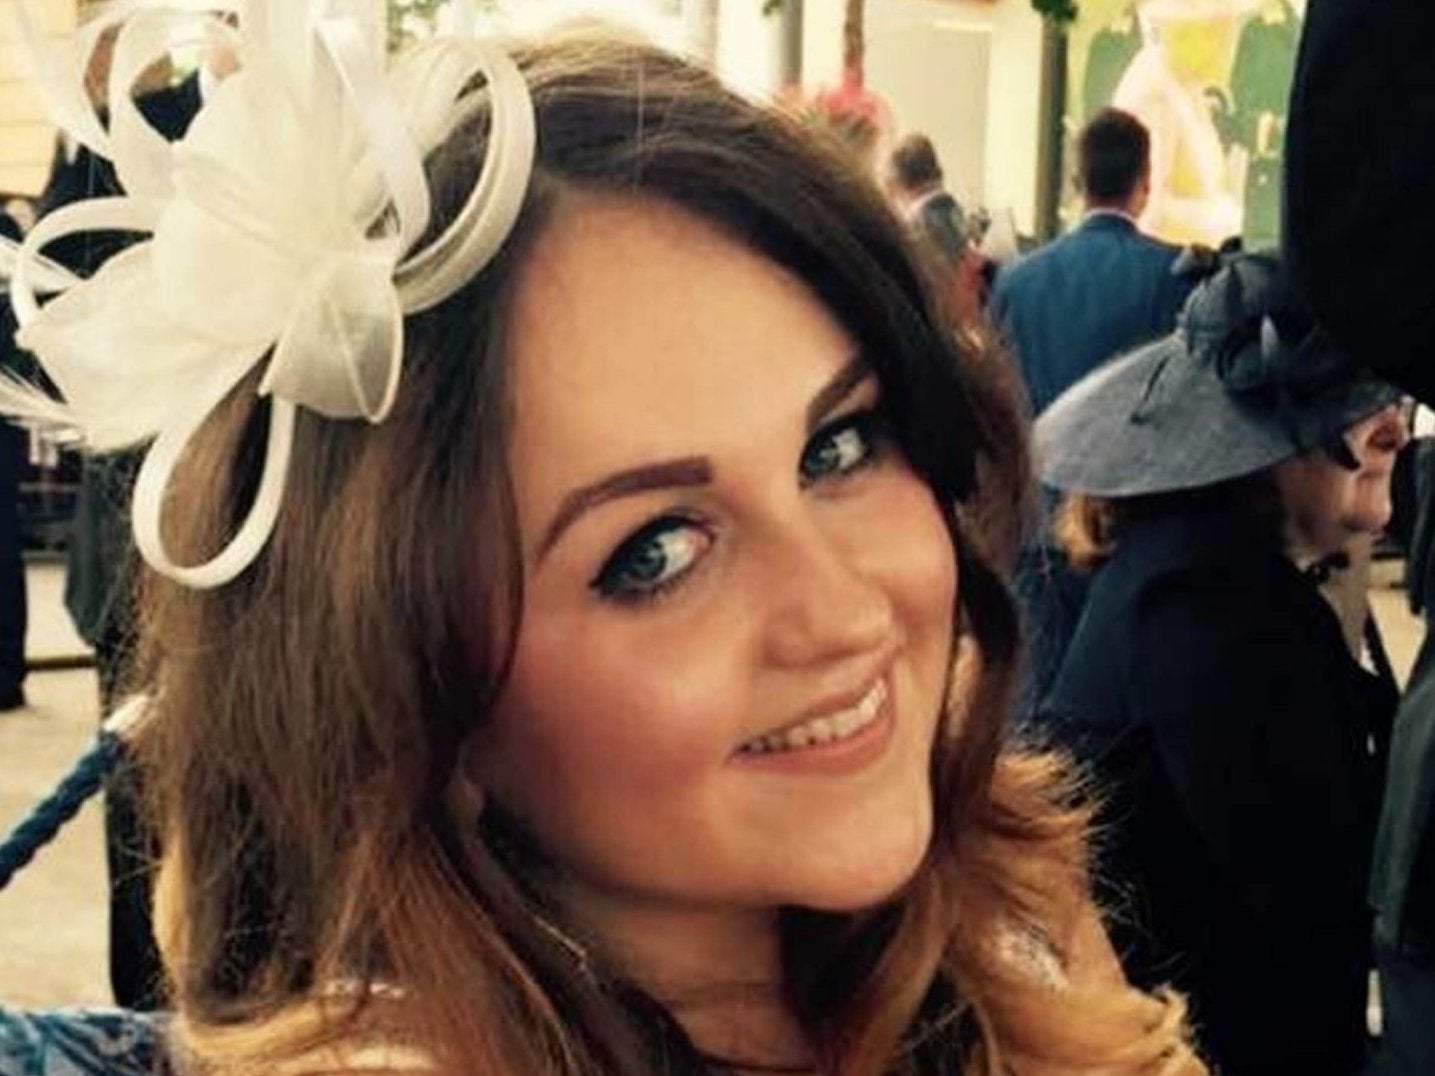 Charlotte Brown, 23, was killed after being thrown out of a speedboat into the Thames